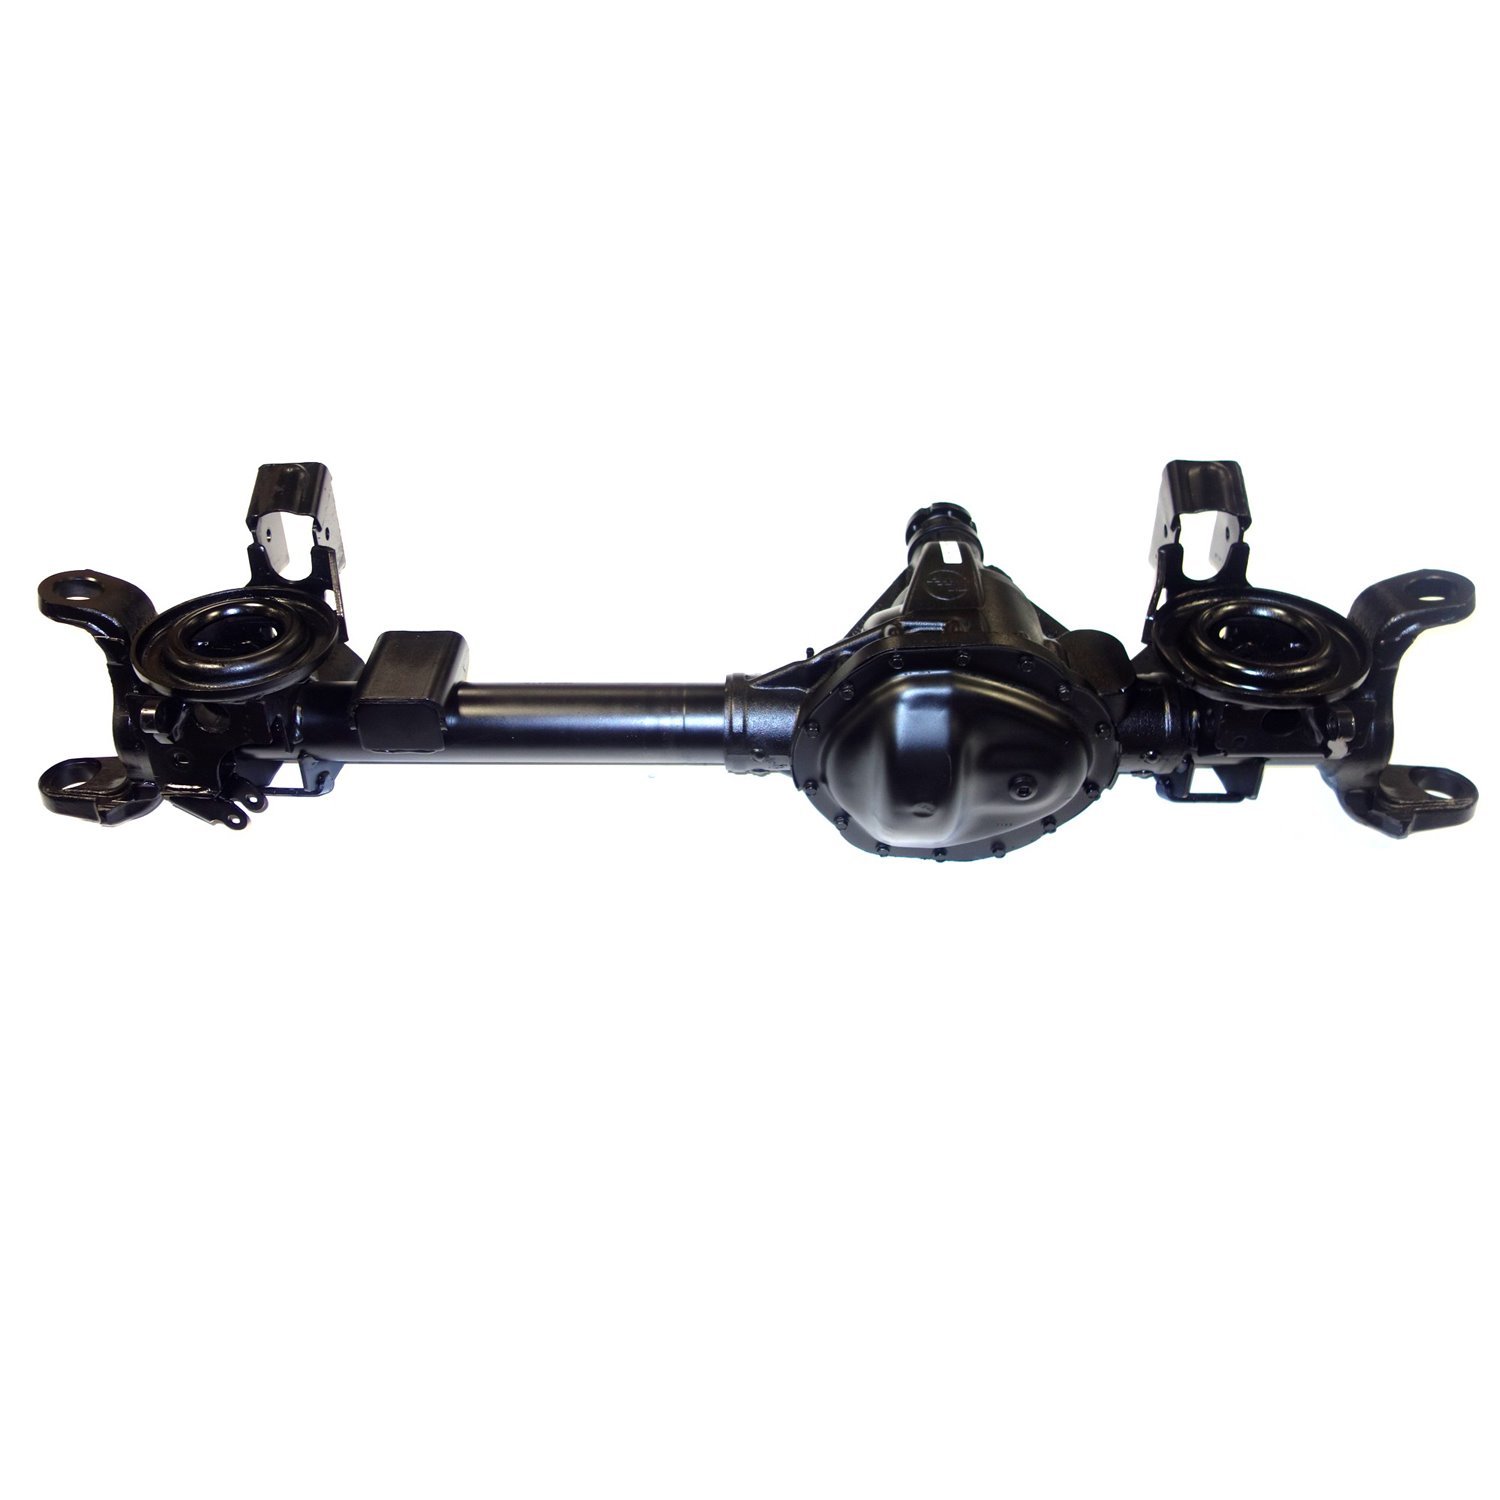 Remanufactured Chy 9.25" Axle Assy for 3/19/07-2008 Ram 1500 Mega Cab, 2500 & 3500, 3.73